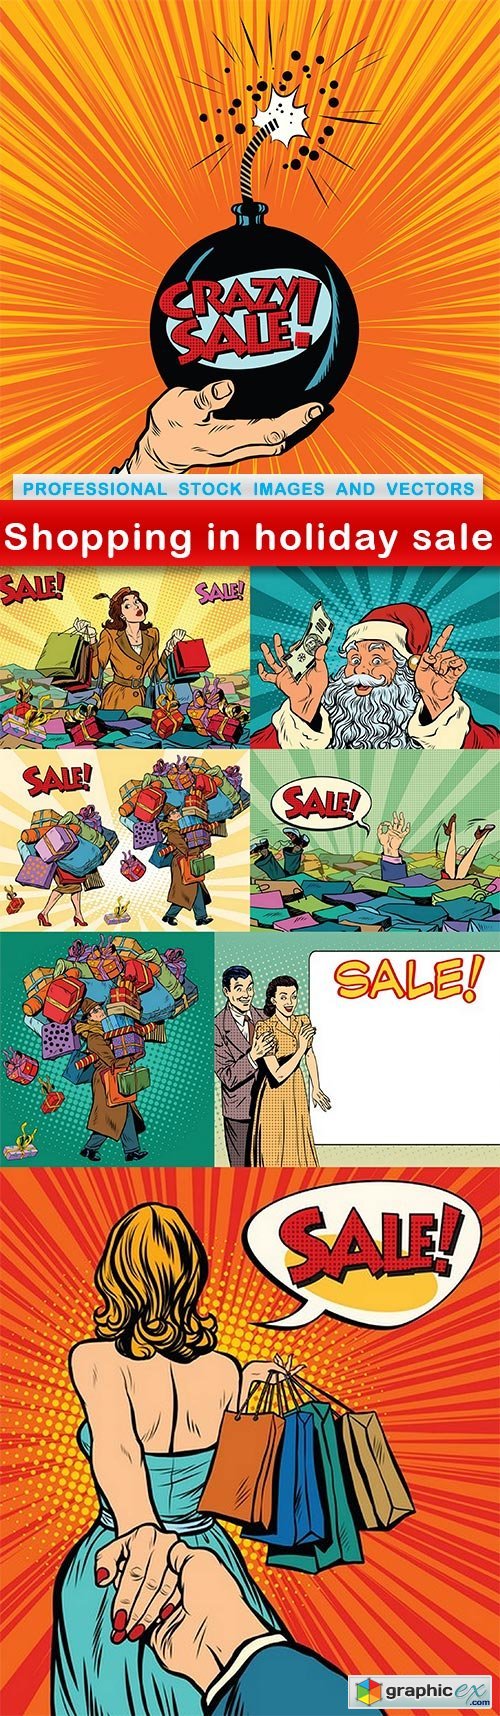 Shopping in holiday sale - 8 EPS